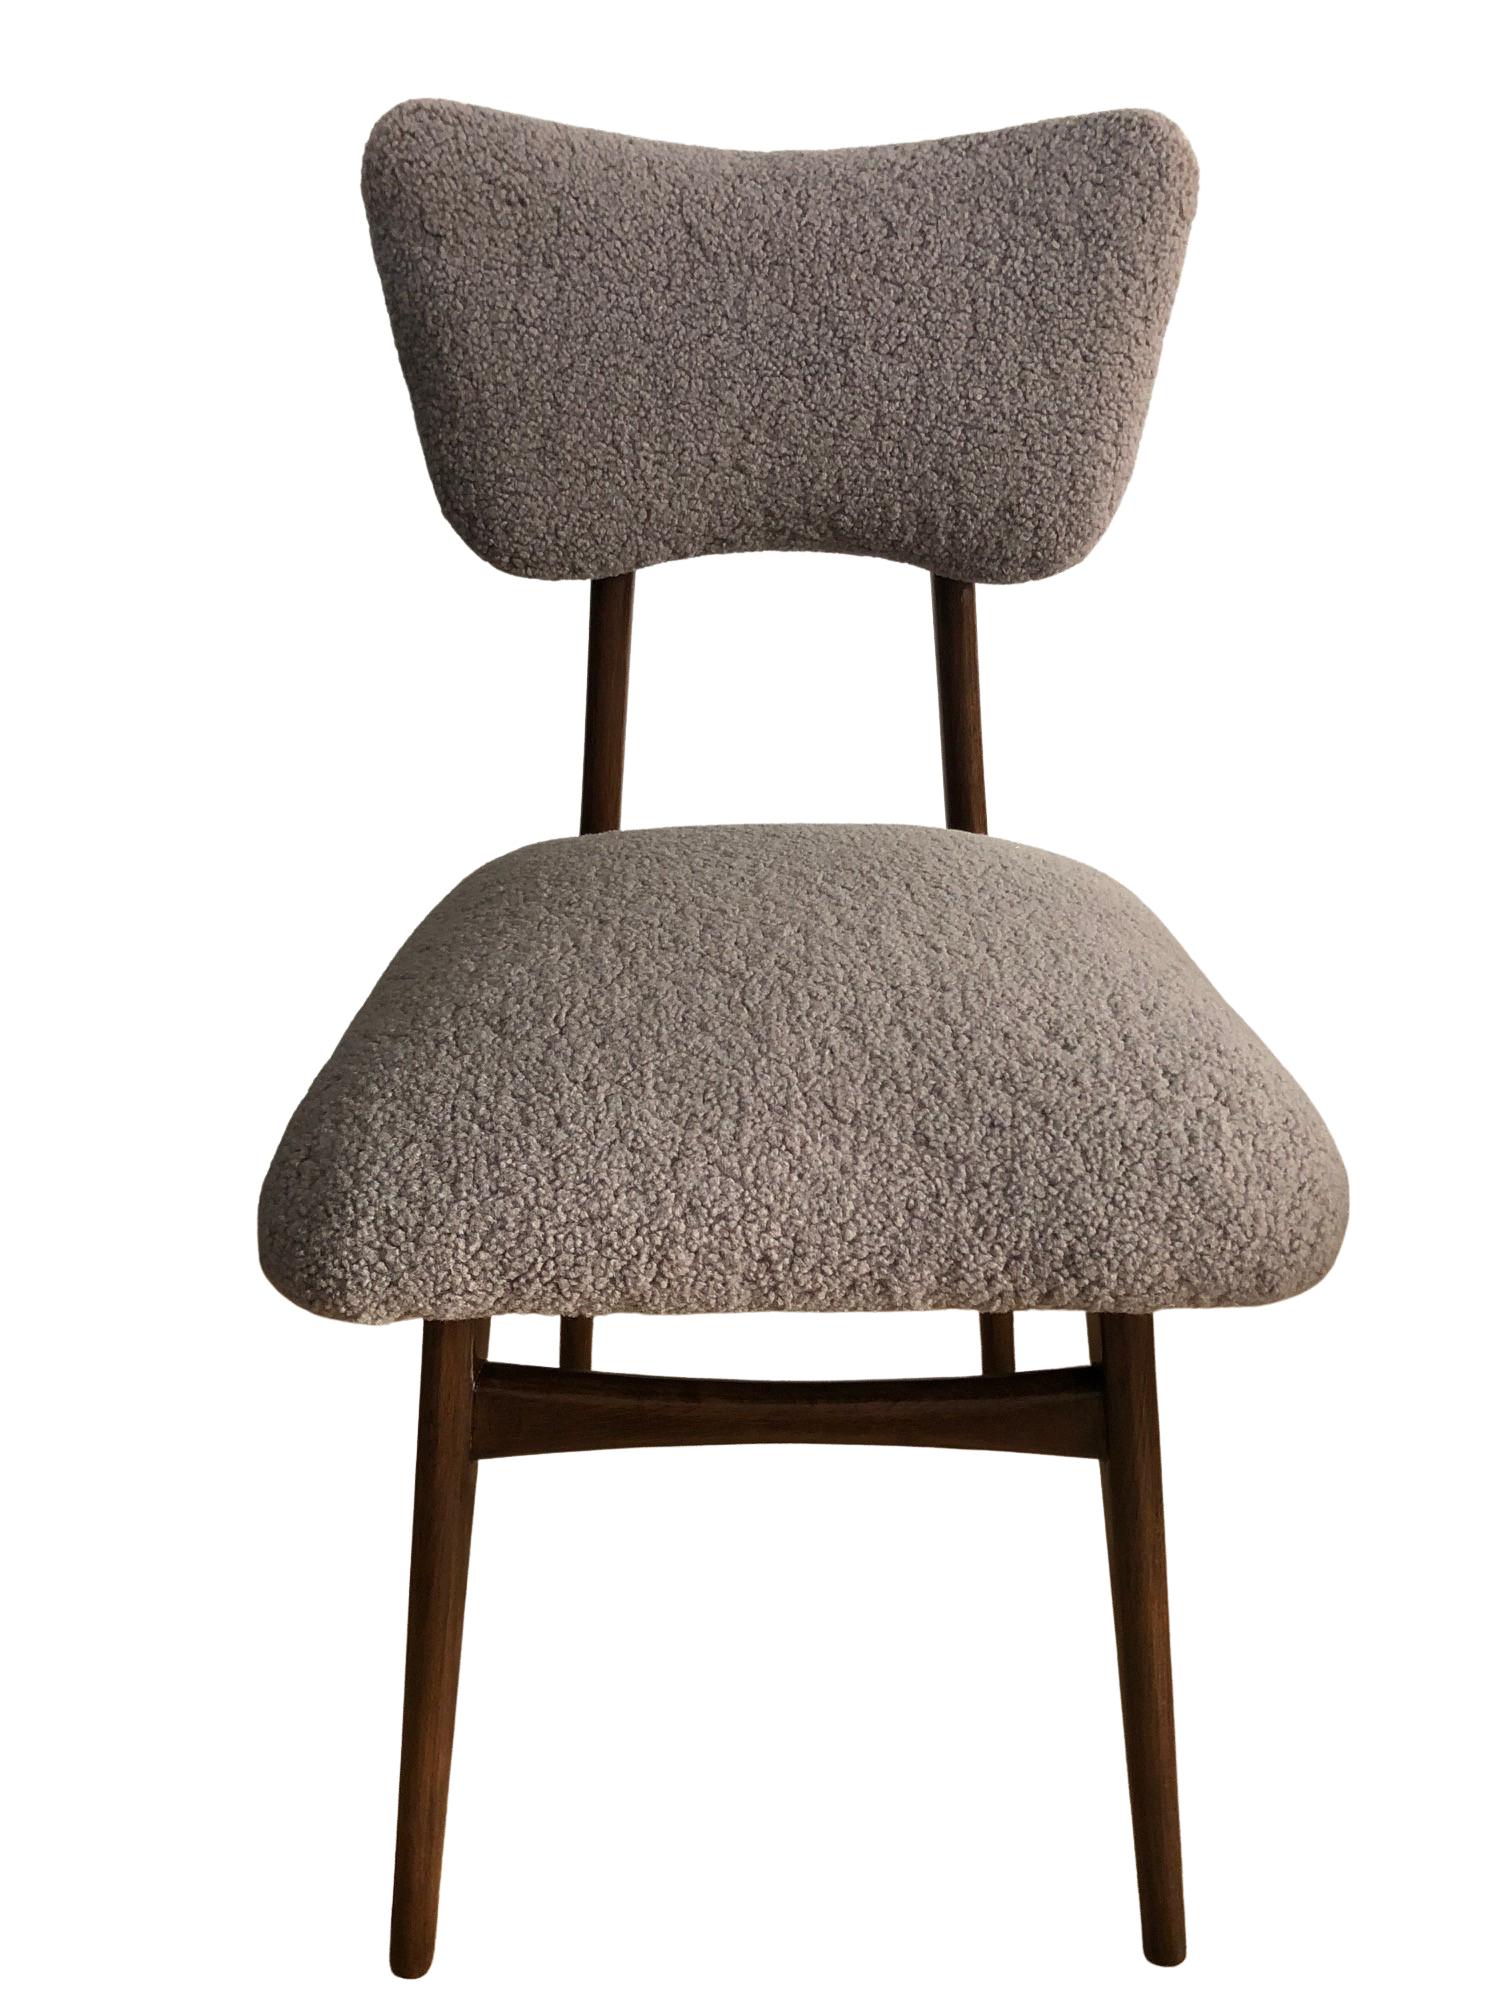 Unique set of eight chairs manufactured in Poland in the 1960s, designed by Rajmund Halas. 

The upholstery is made of pleasant to touch boucle textile. It is high quality and durable italian fabric in a warm taupe (light grey light beige) color.